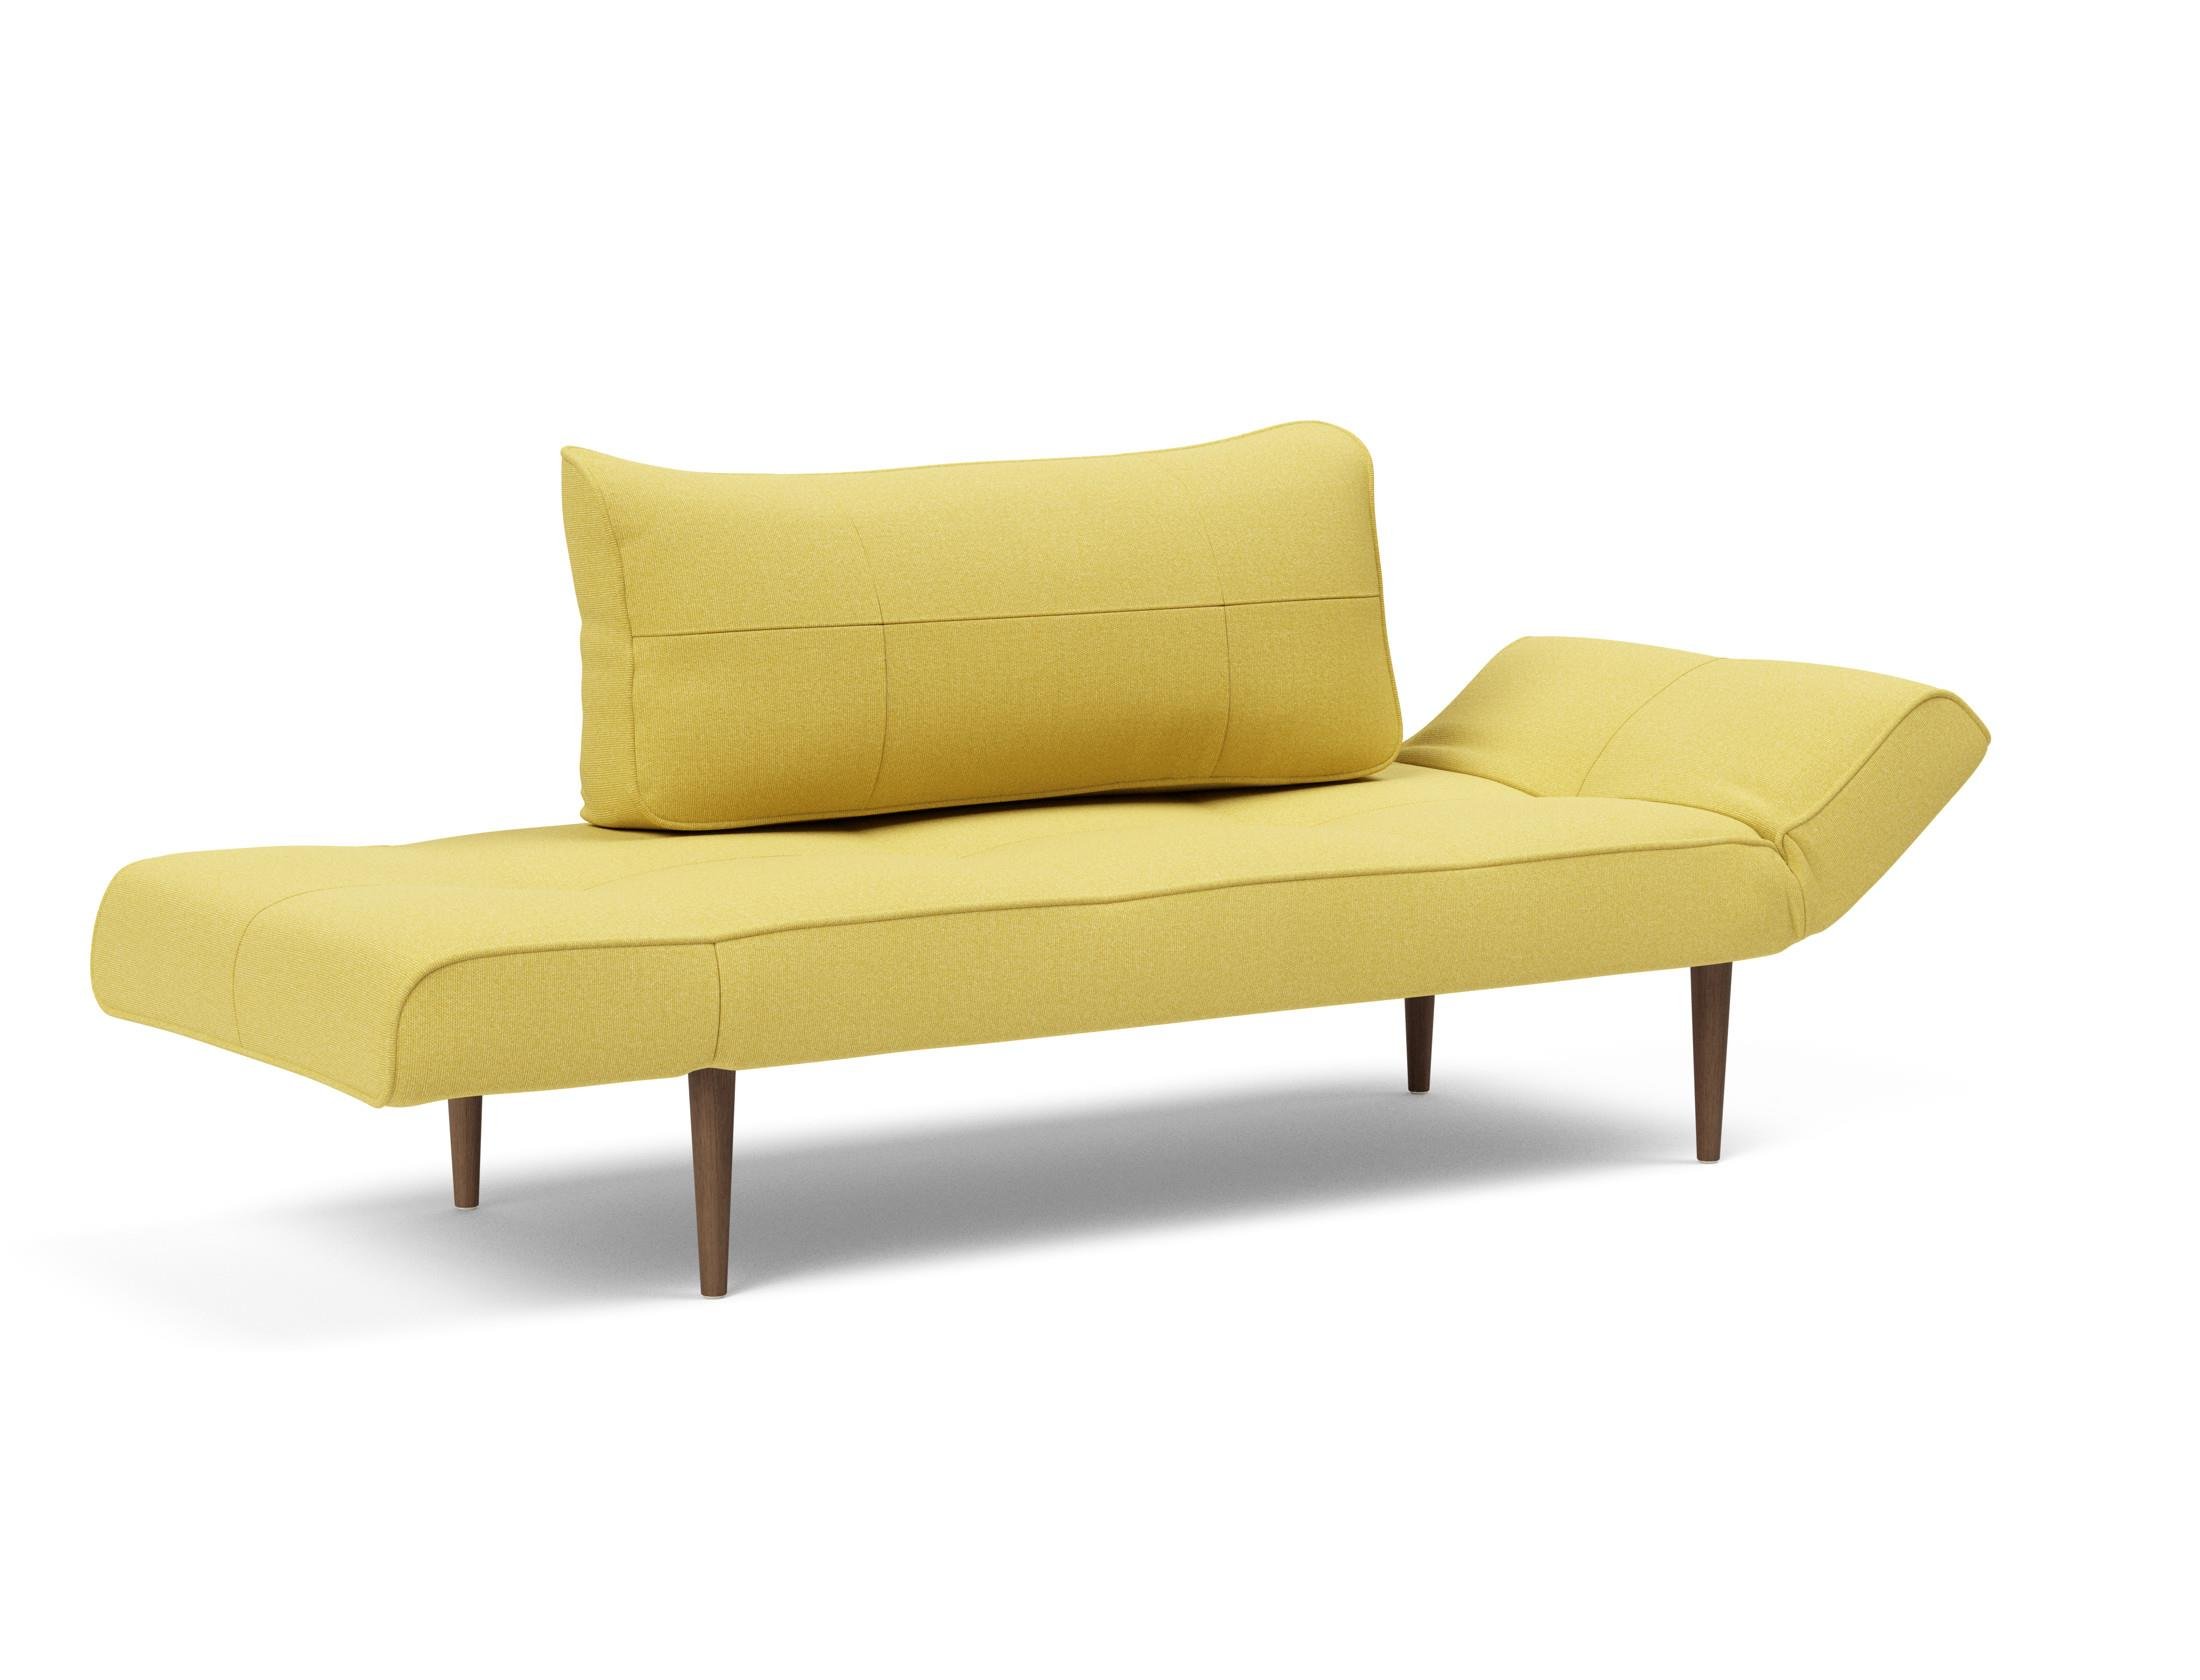 Zeal-Styletto-Daybed-554-p6-web.jpg